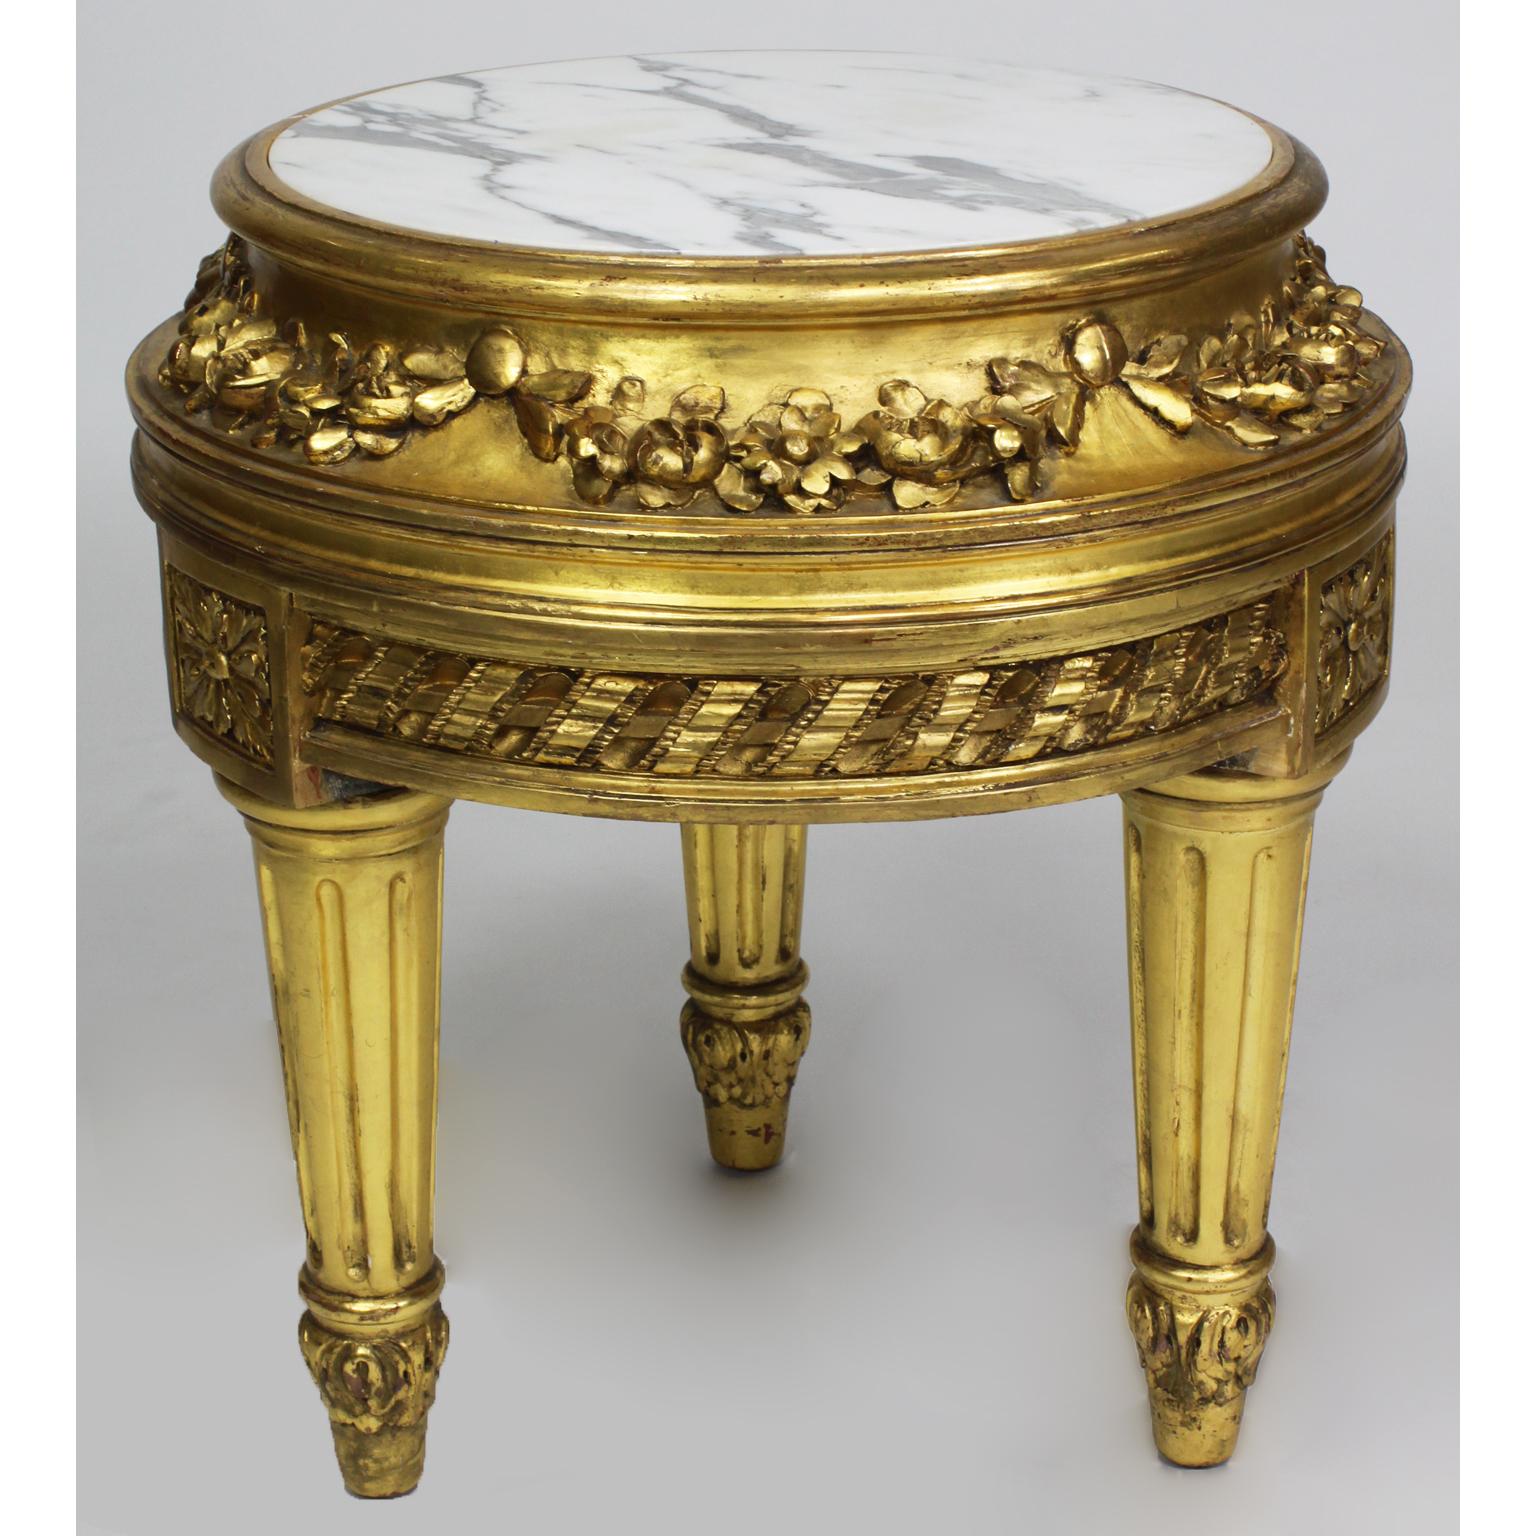 A French Belle Époque Louis XVI style giltwood carver pedestal stand with marble top. The circular pedestal with carvings of flowers and fitted with a veined white marble top, raised on three fluted legs. Paris, circa 1920.

Measures: Height 21